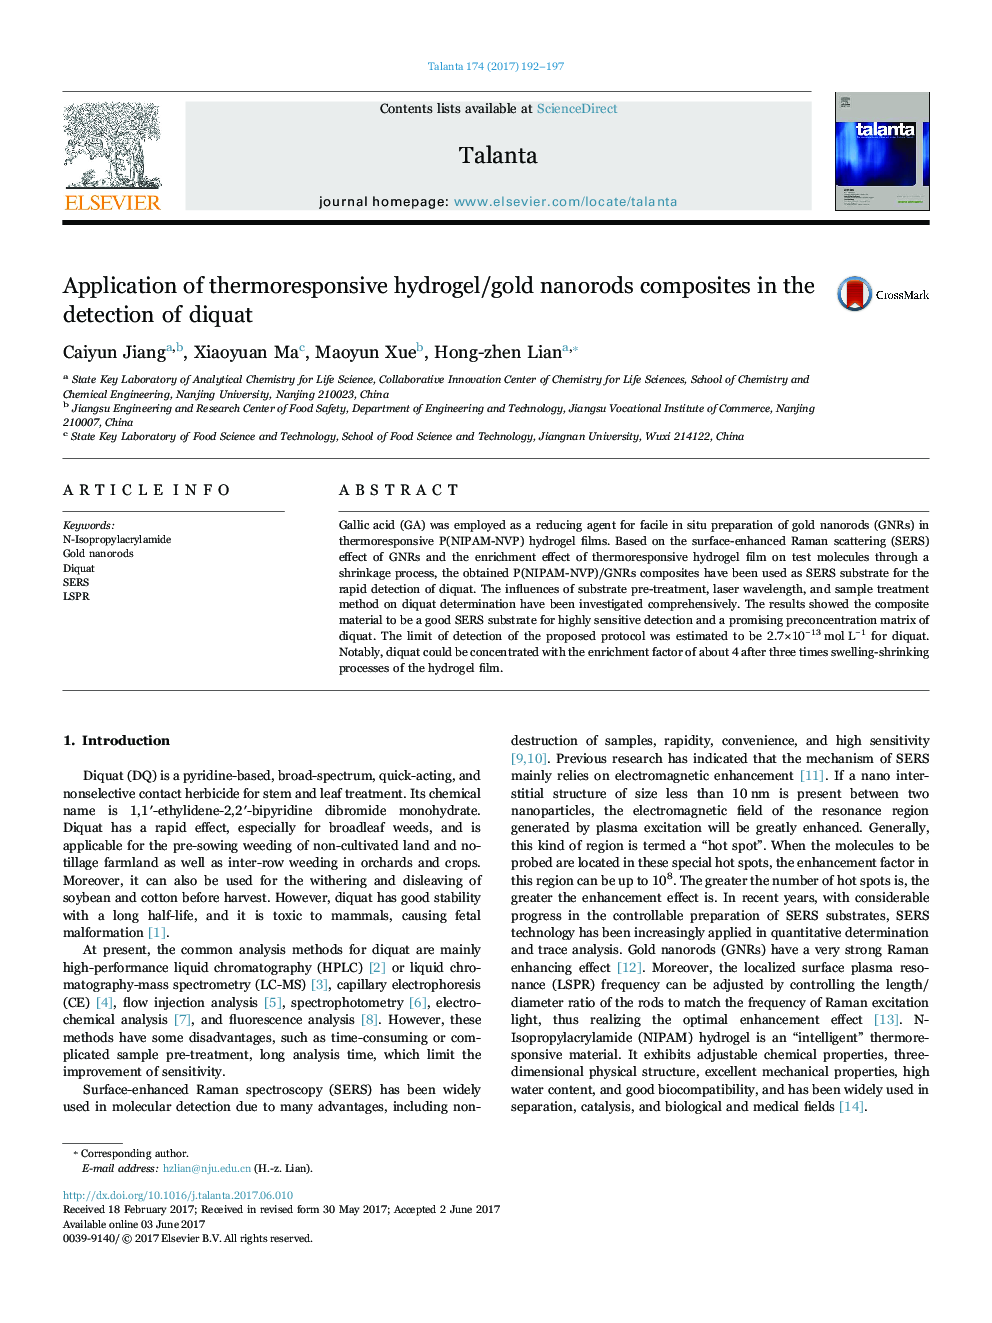 Application of thermoresponsive hydrogel/gold nanorods composites in the detection of diquat